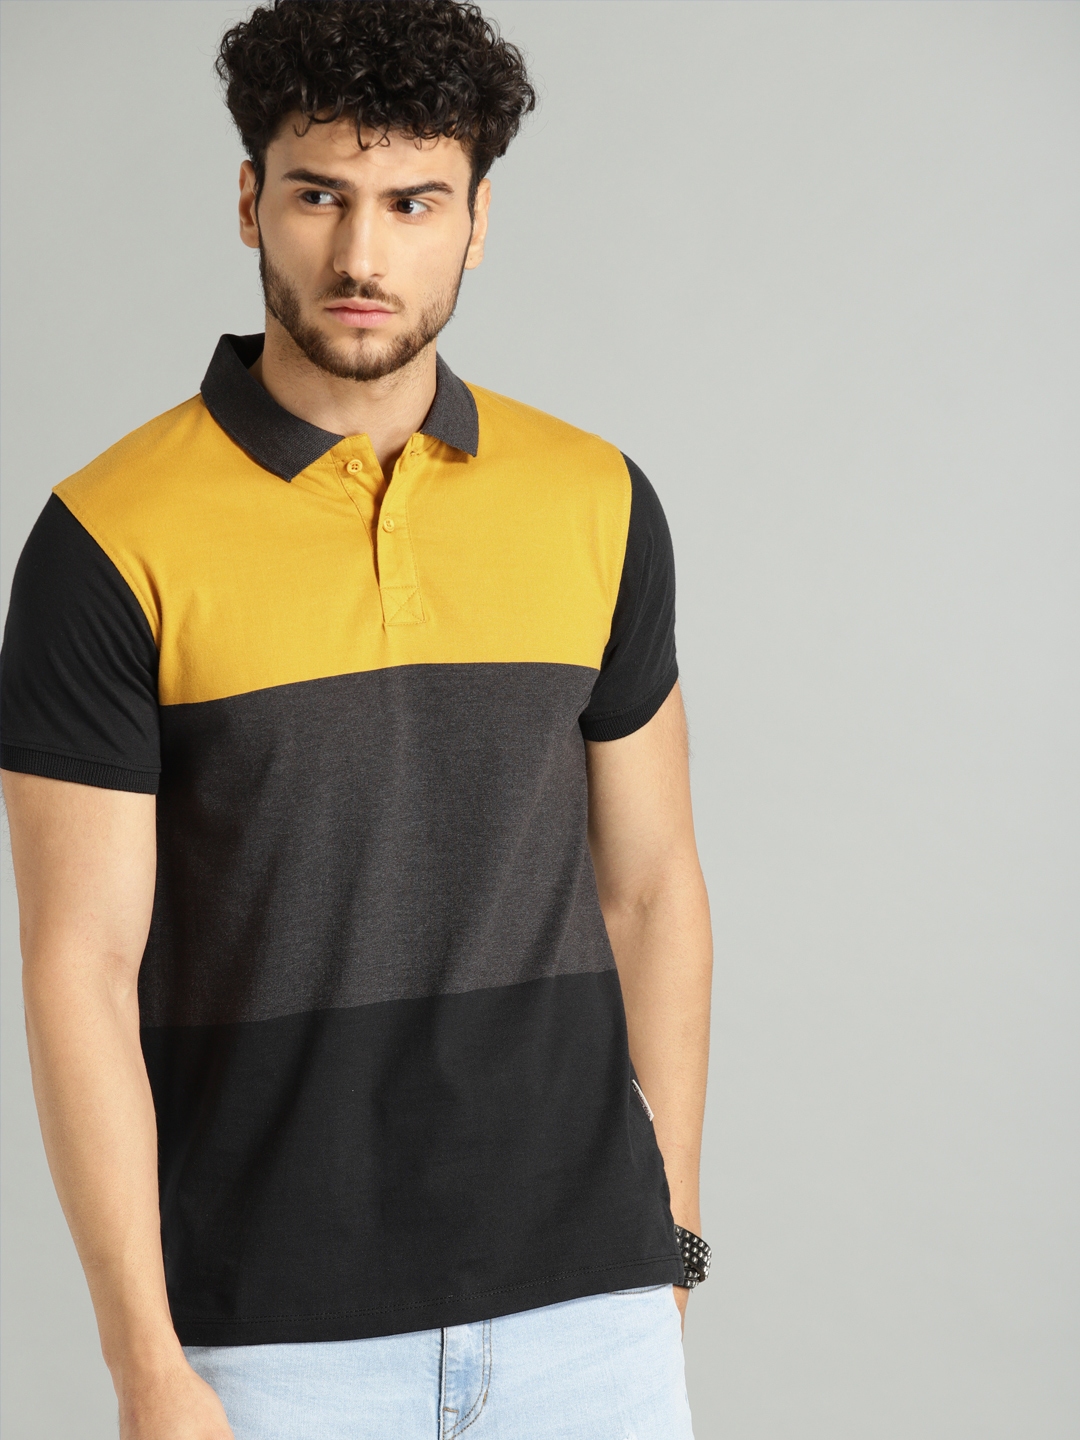 Buy The Roadster Lifestyle Co Men Mustard Yellow Charcoal Grey ...